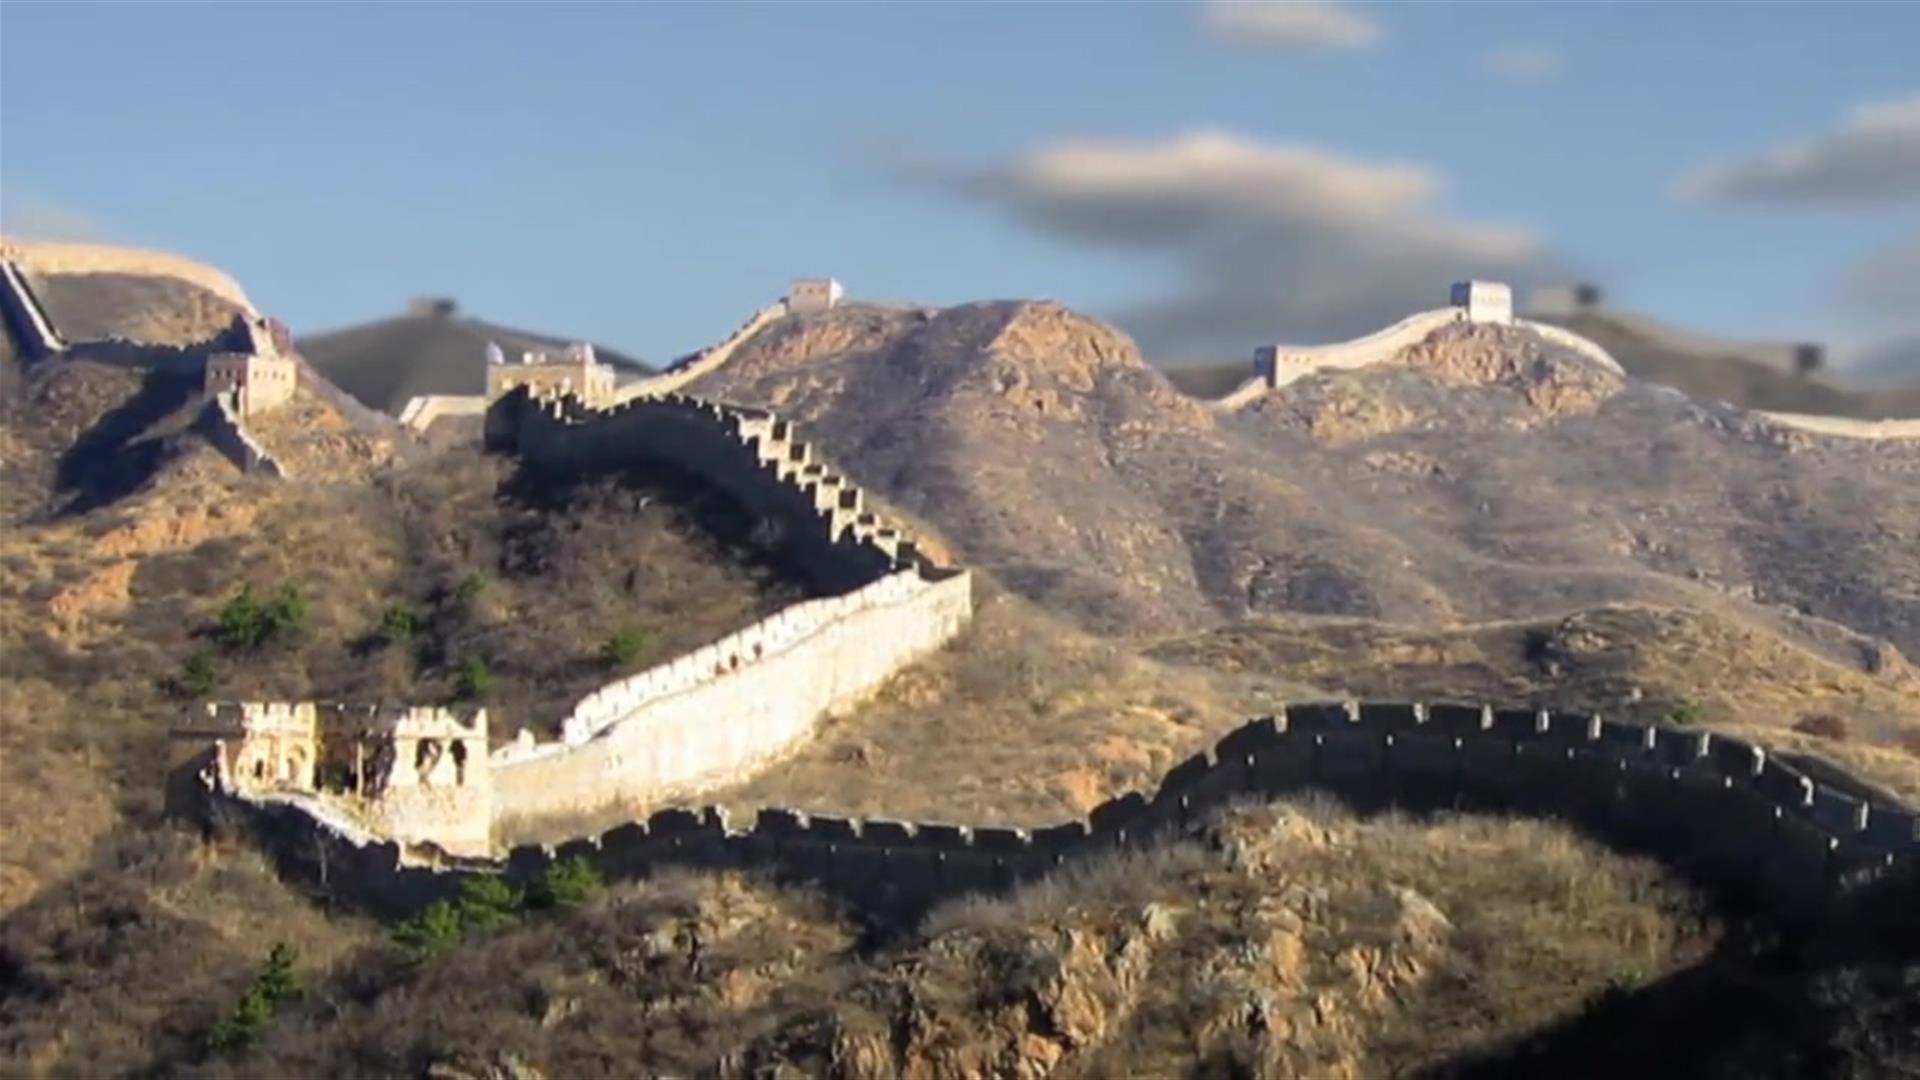 Great Wall of China: Length, History, Map, Why & When Built It